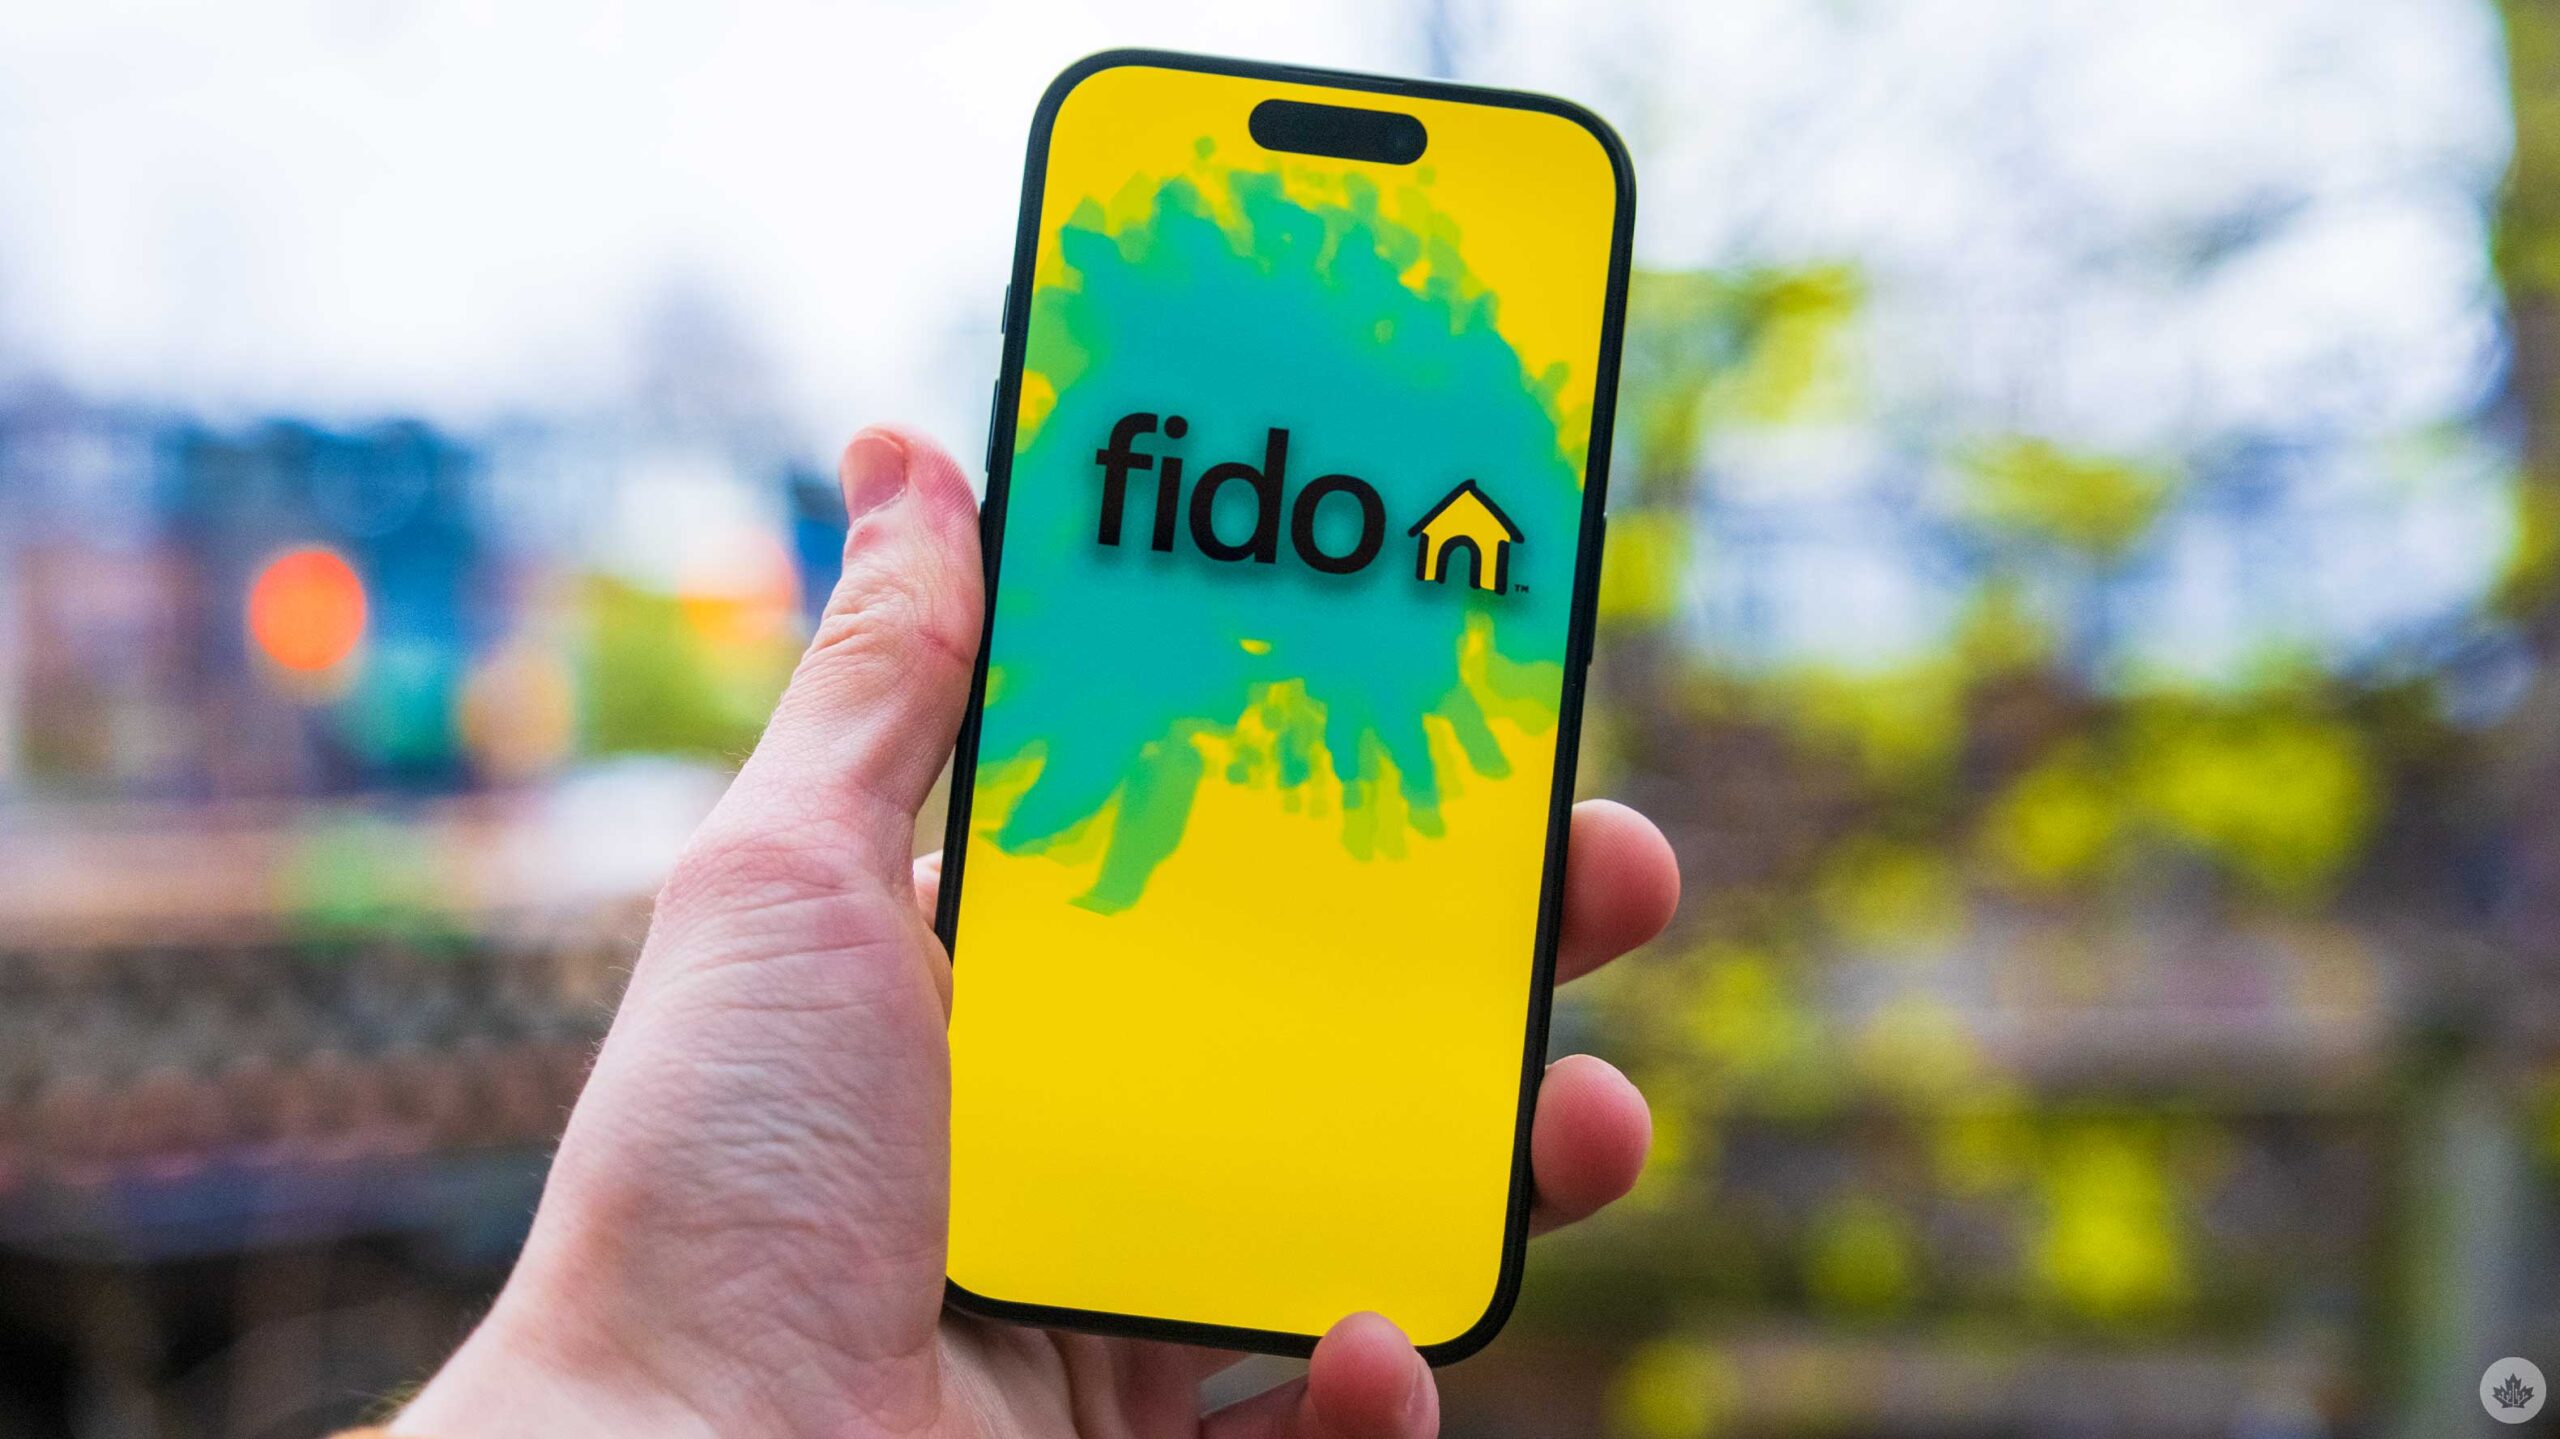 Exclusive Offers for Fido Customers: $30 for 60GB, $40 for 90GB, and More Special Deals 26